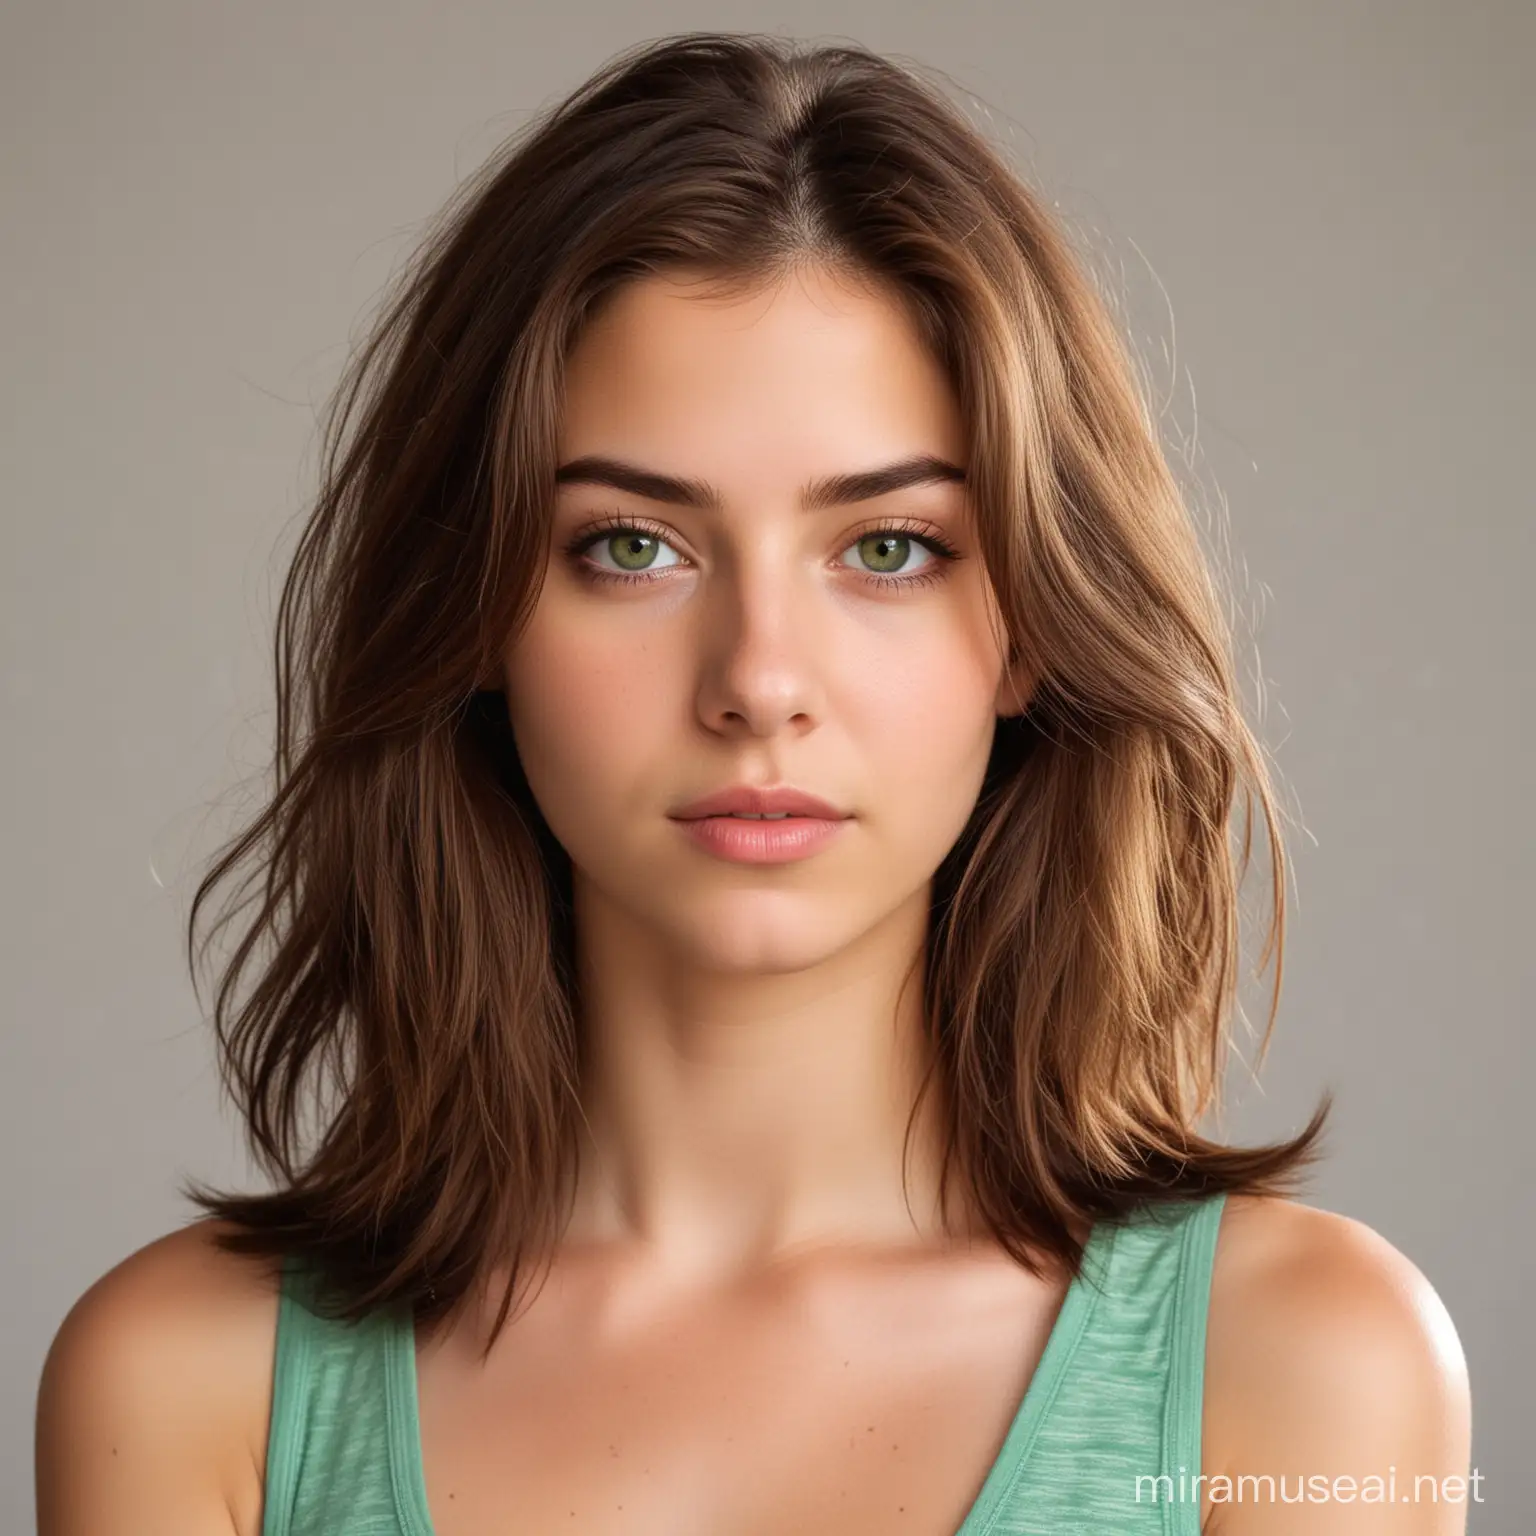 Serious Young Woman with Green Eyes and Brown Hair